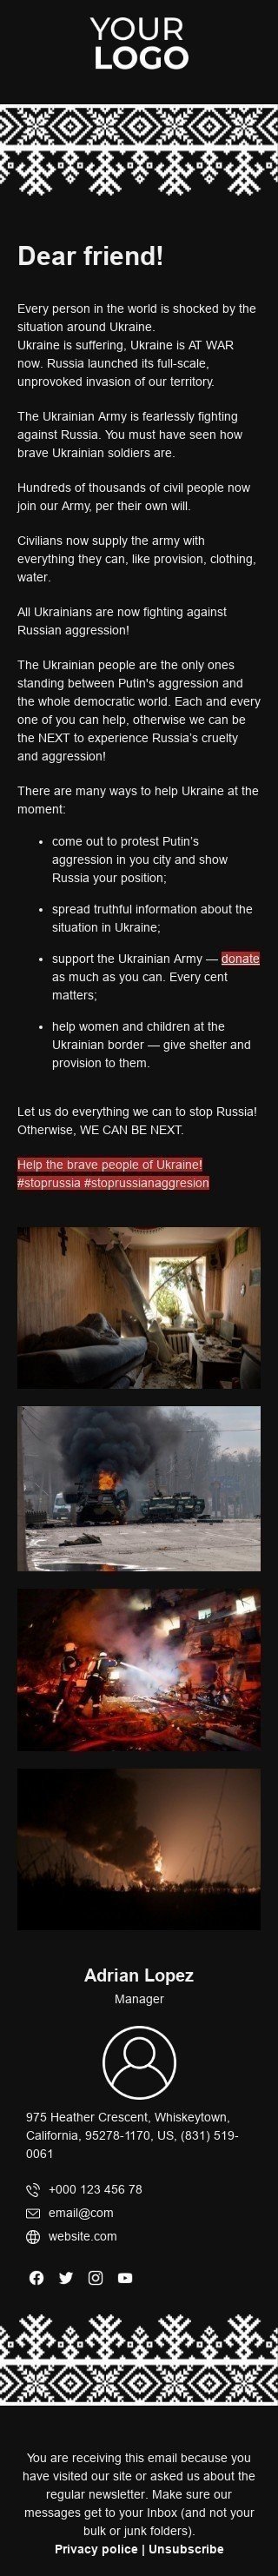 The "Let's Stop this War Together: Spread the word about this tragedy" email template mobile view